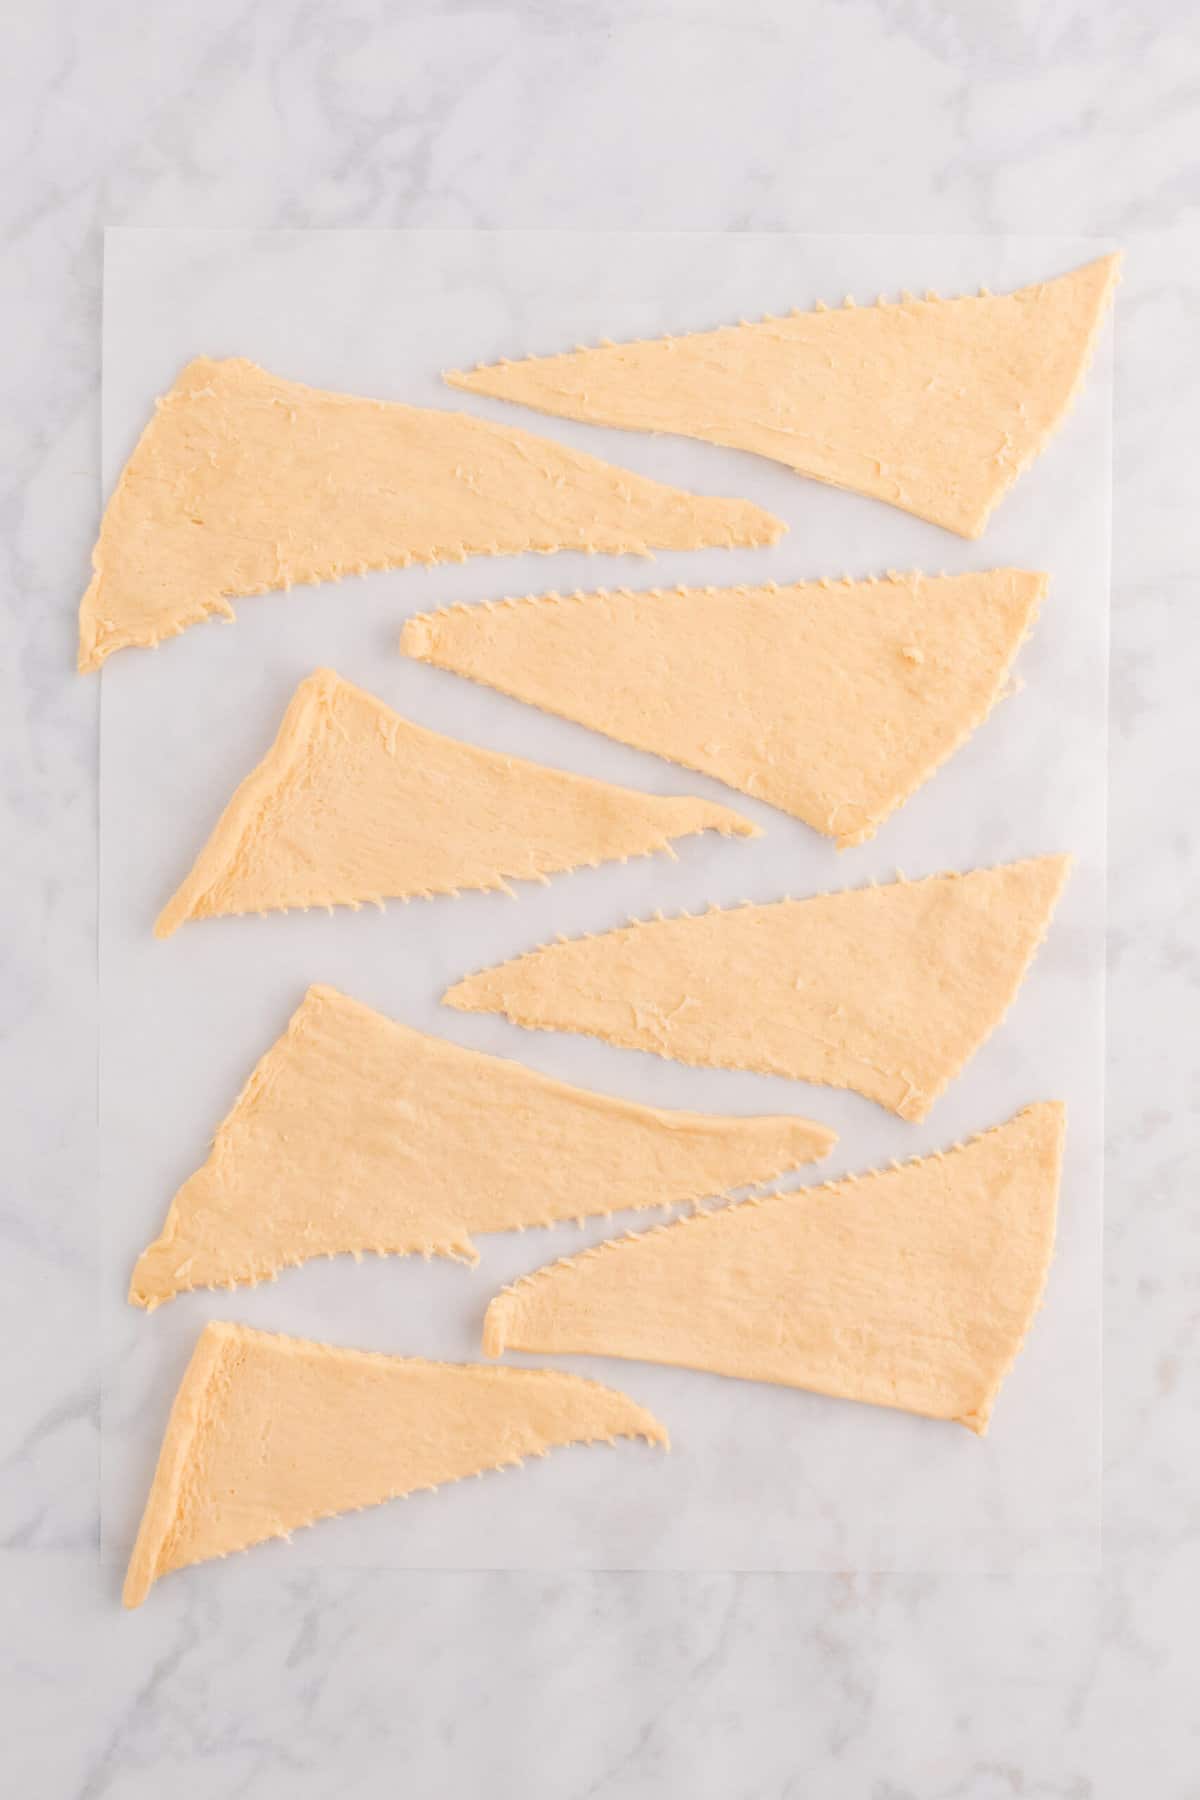 Unroll Crescent rolls and separate on a piece of parchment paper.